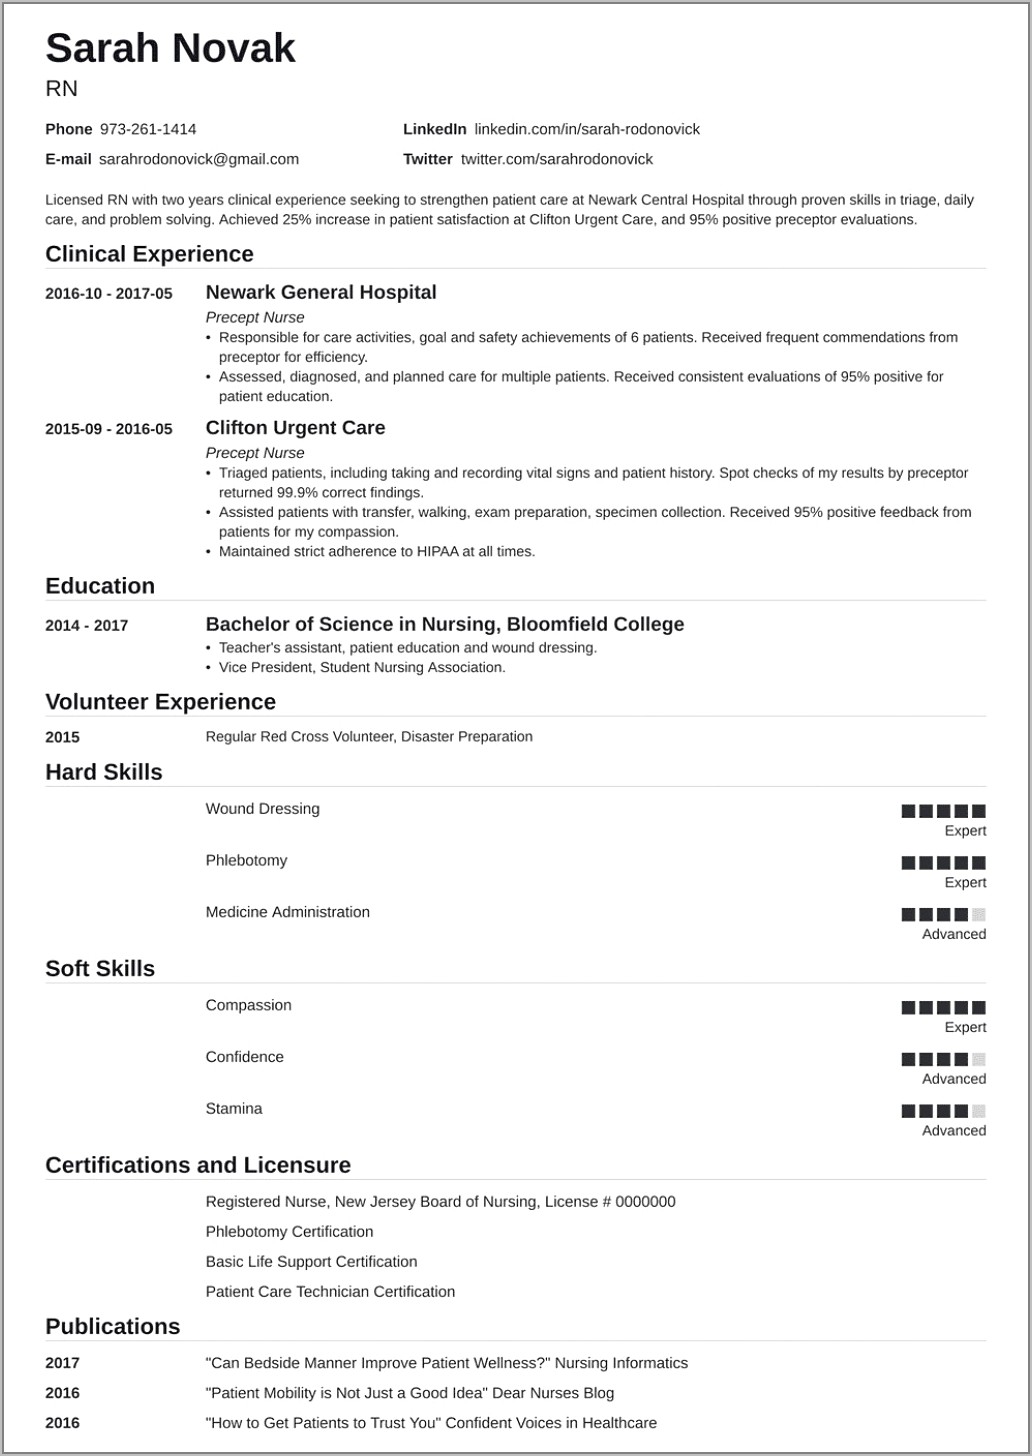 Example Resume For Rn Graduate